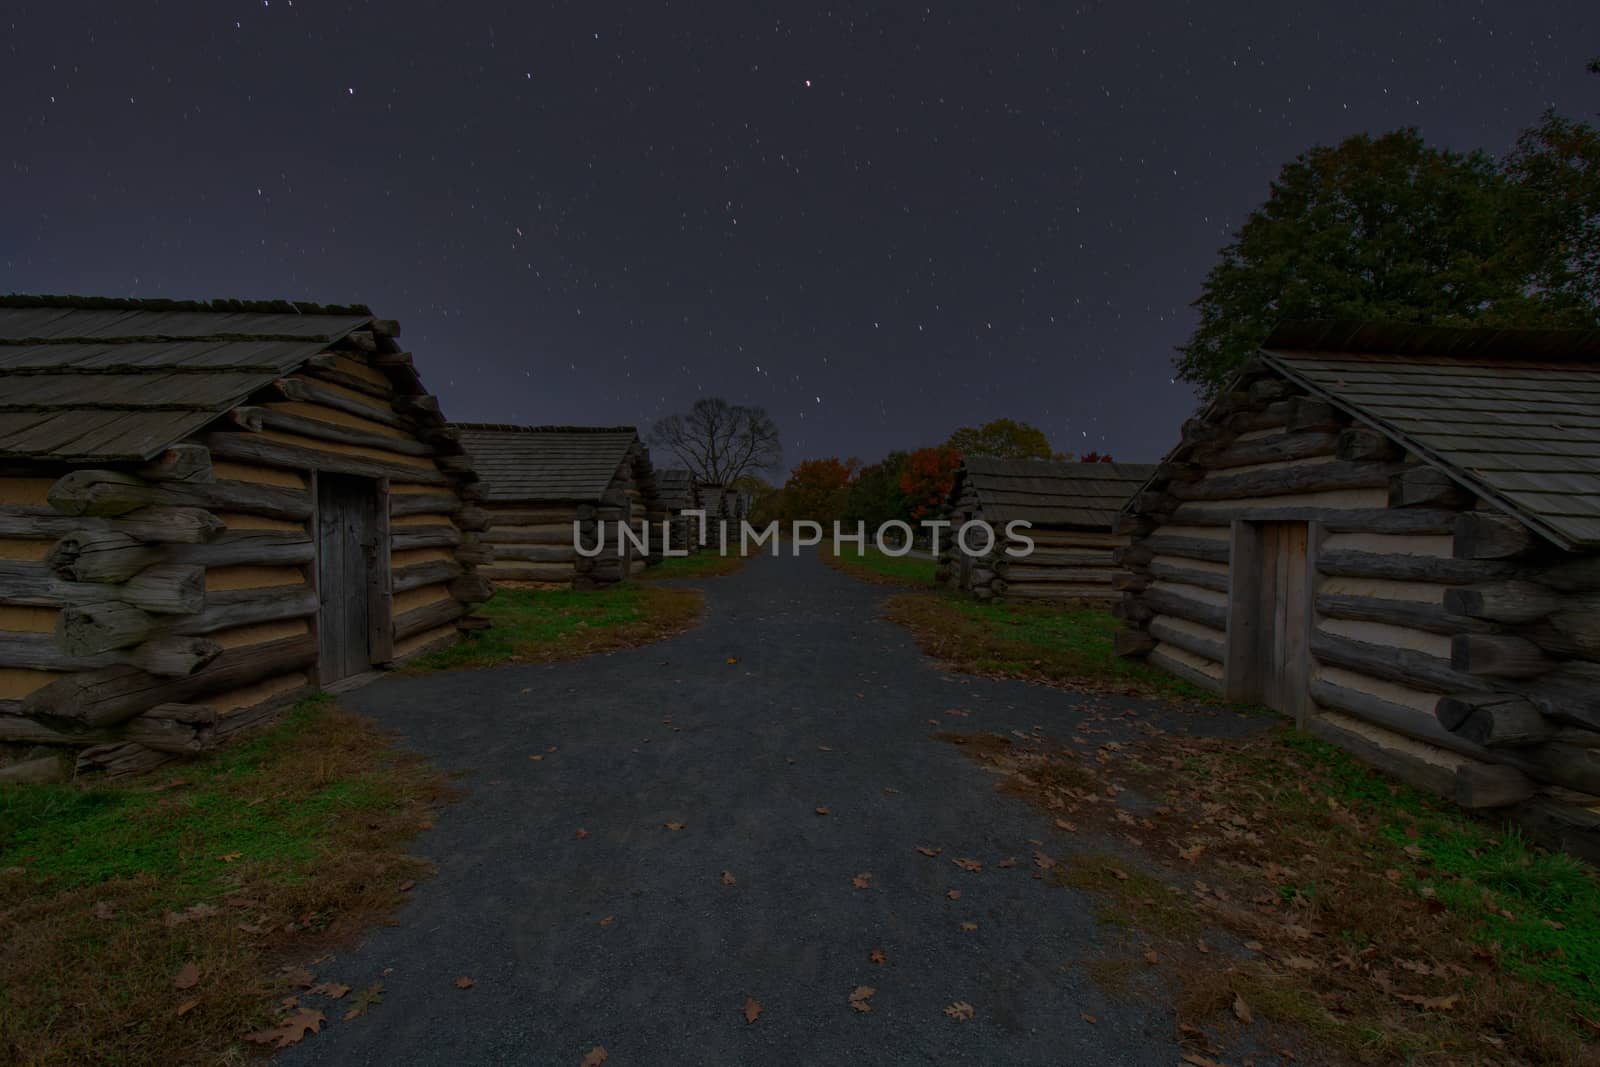 Reproduction Log Huts at Valley Forge Park at Night With Stars by bju12290